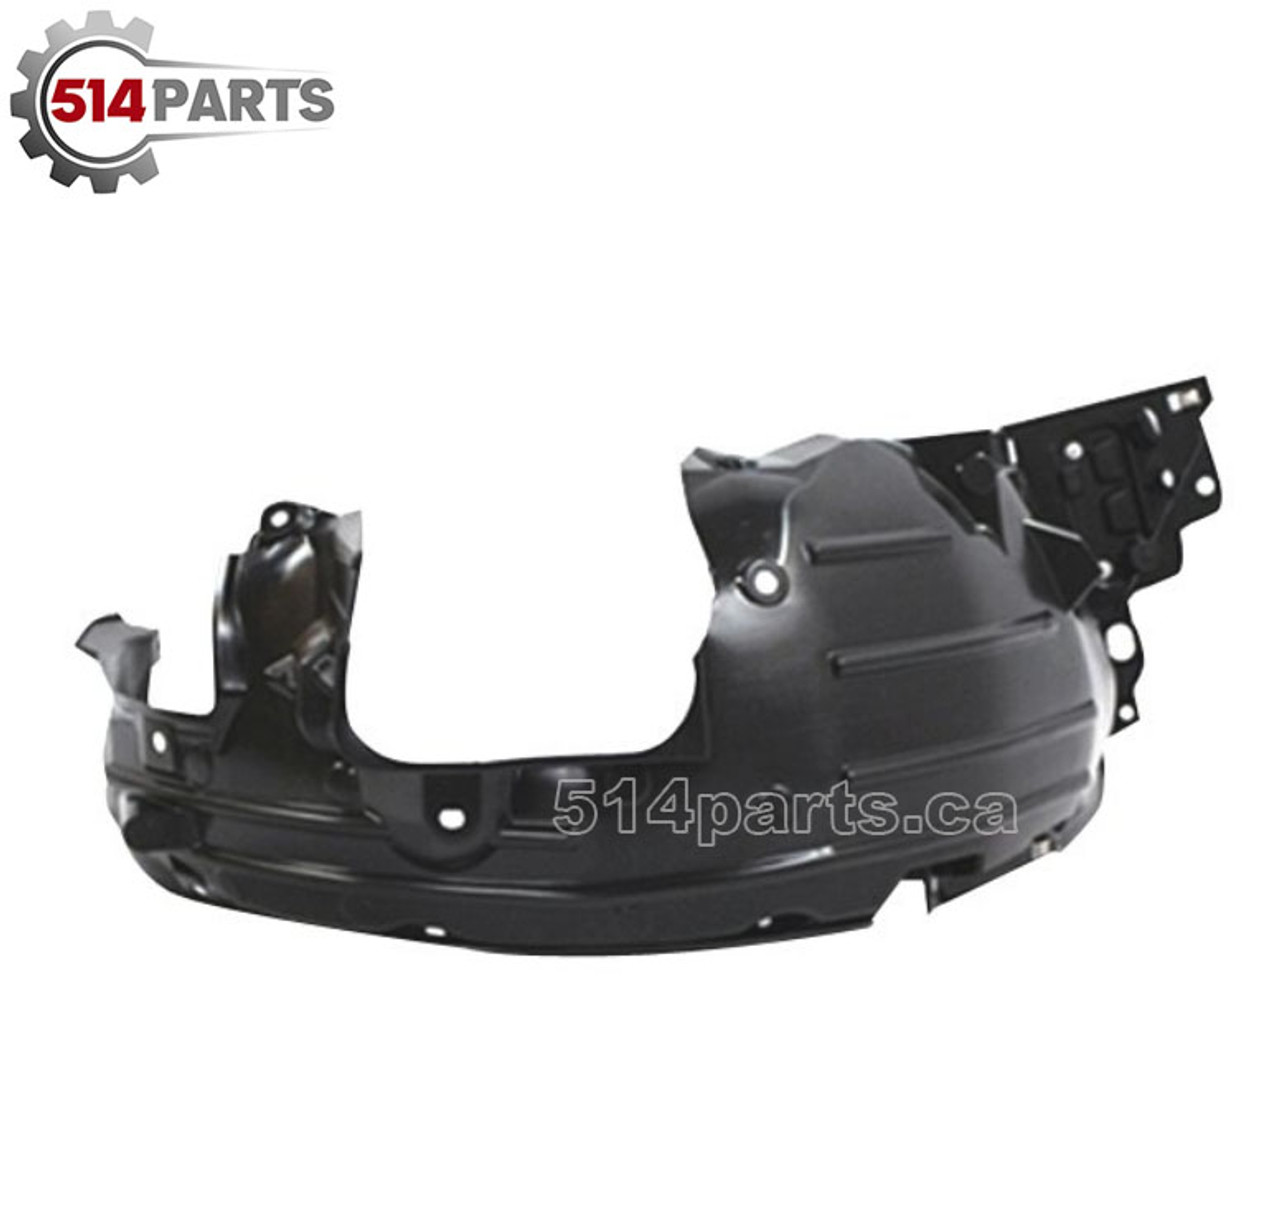 2015 - 2017 HONDA FIT FENDER LINER with BRACKET -  FAUSSE AILE avec SUPPORT